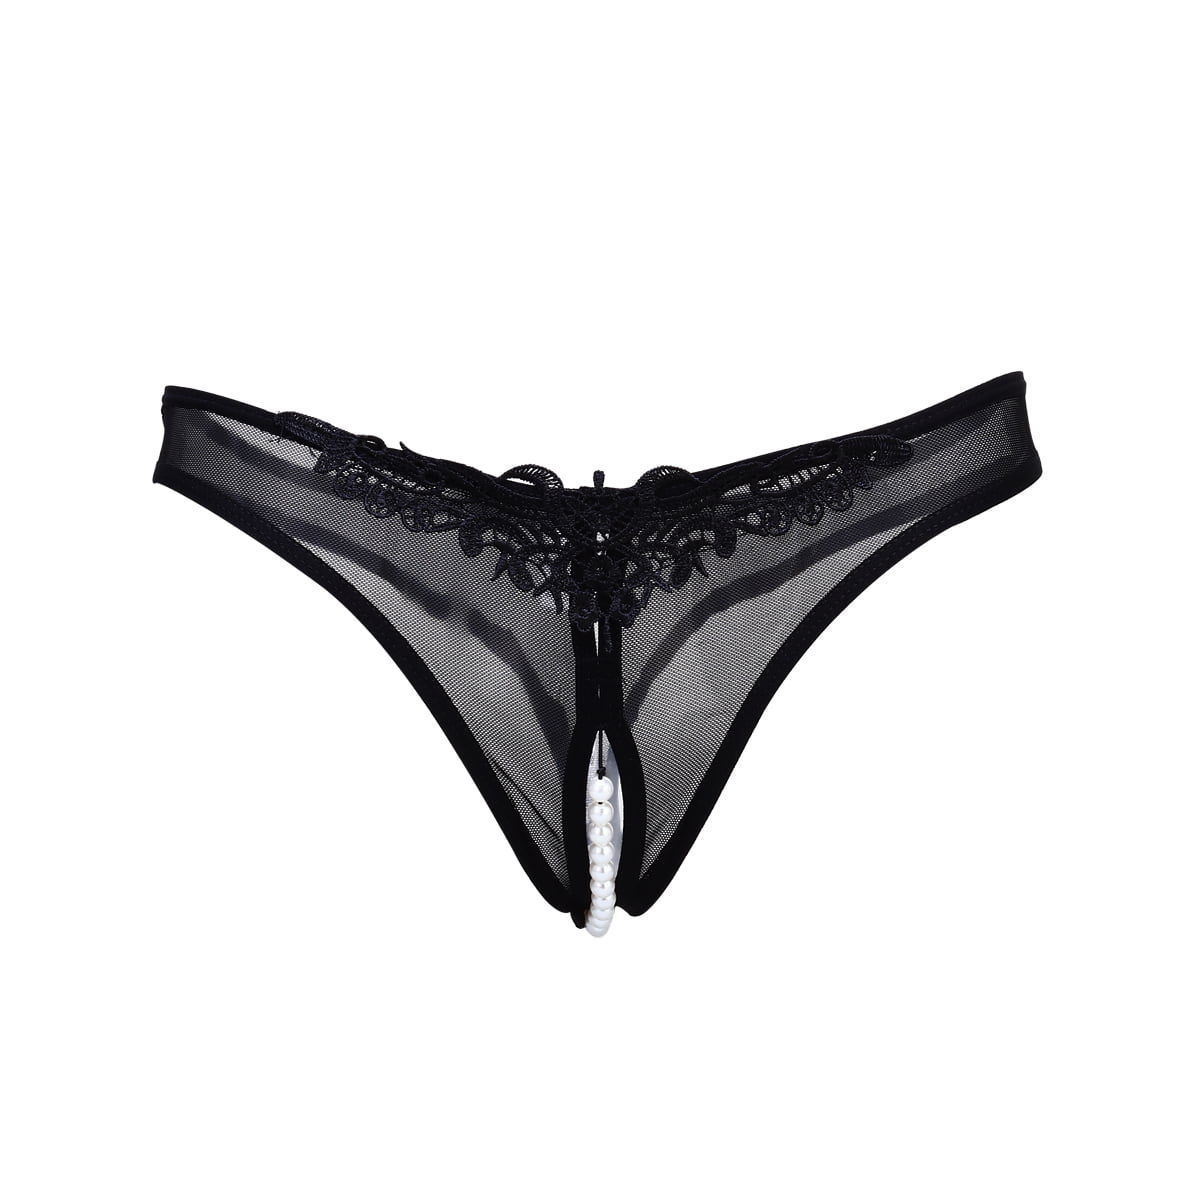 Shop Generic Lingerie Pearl Underwear with Lace Open Crotch Thong Black